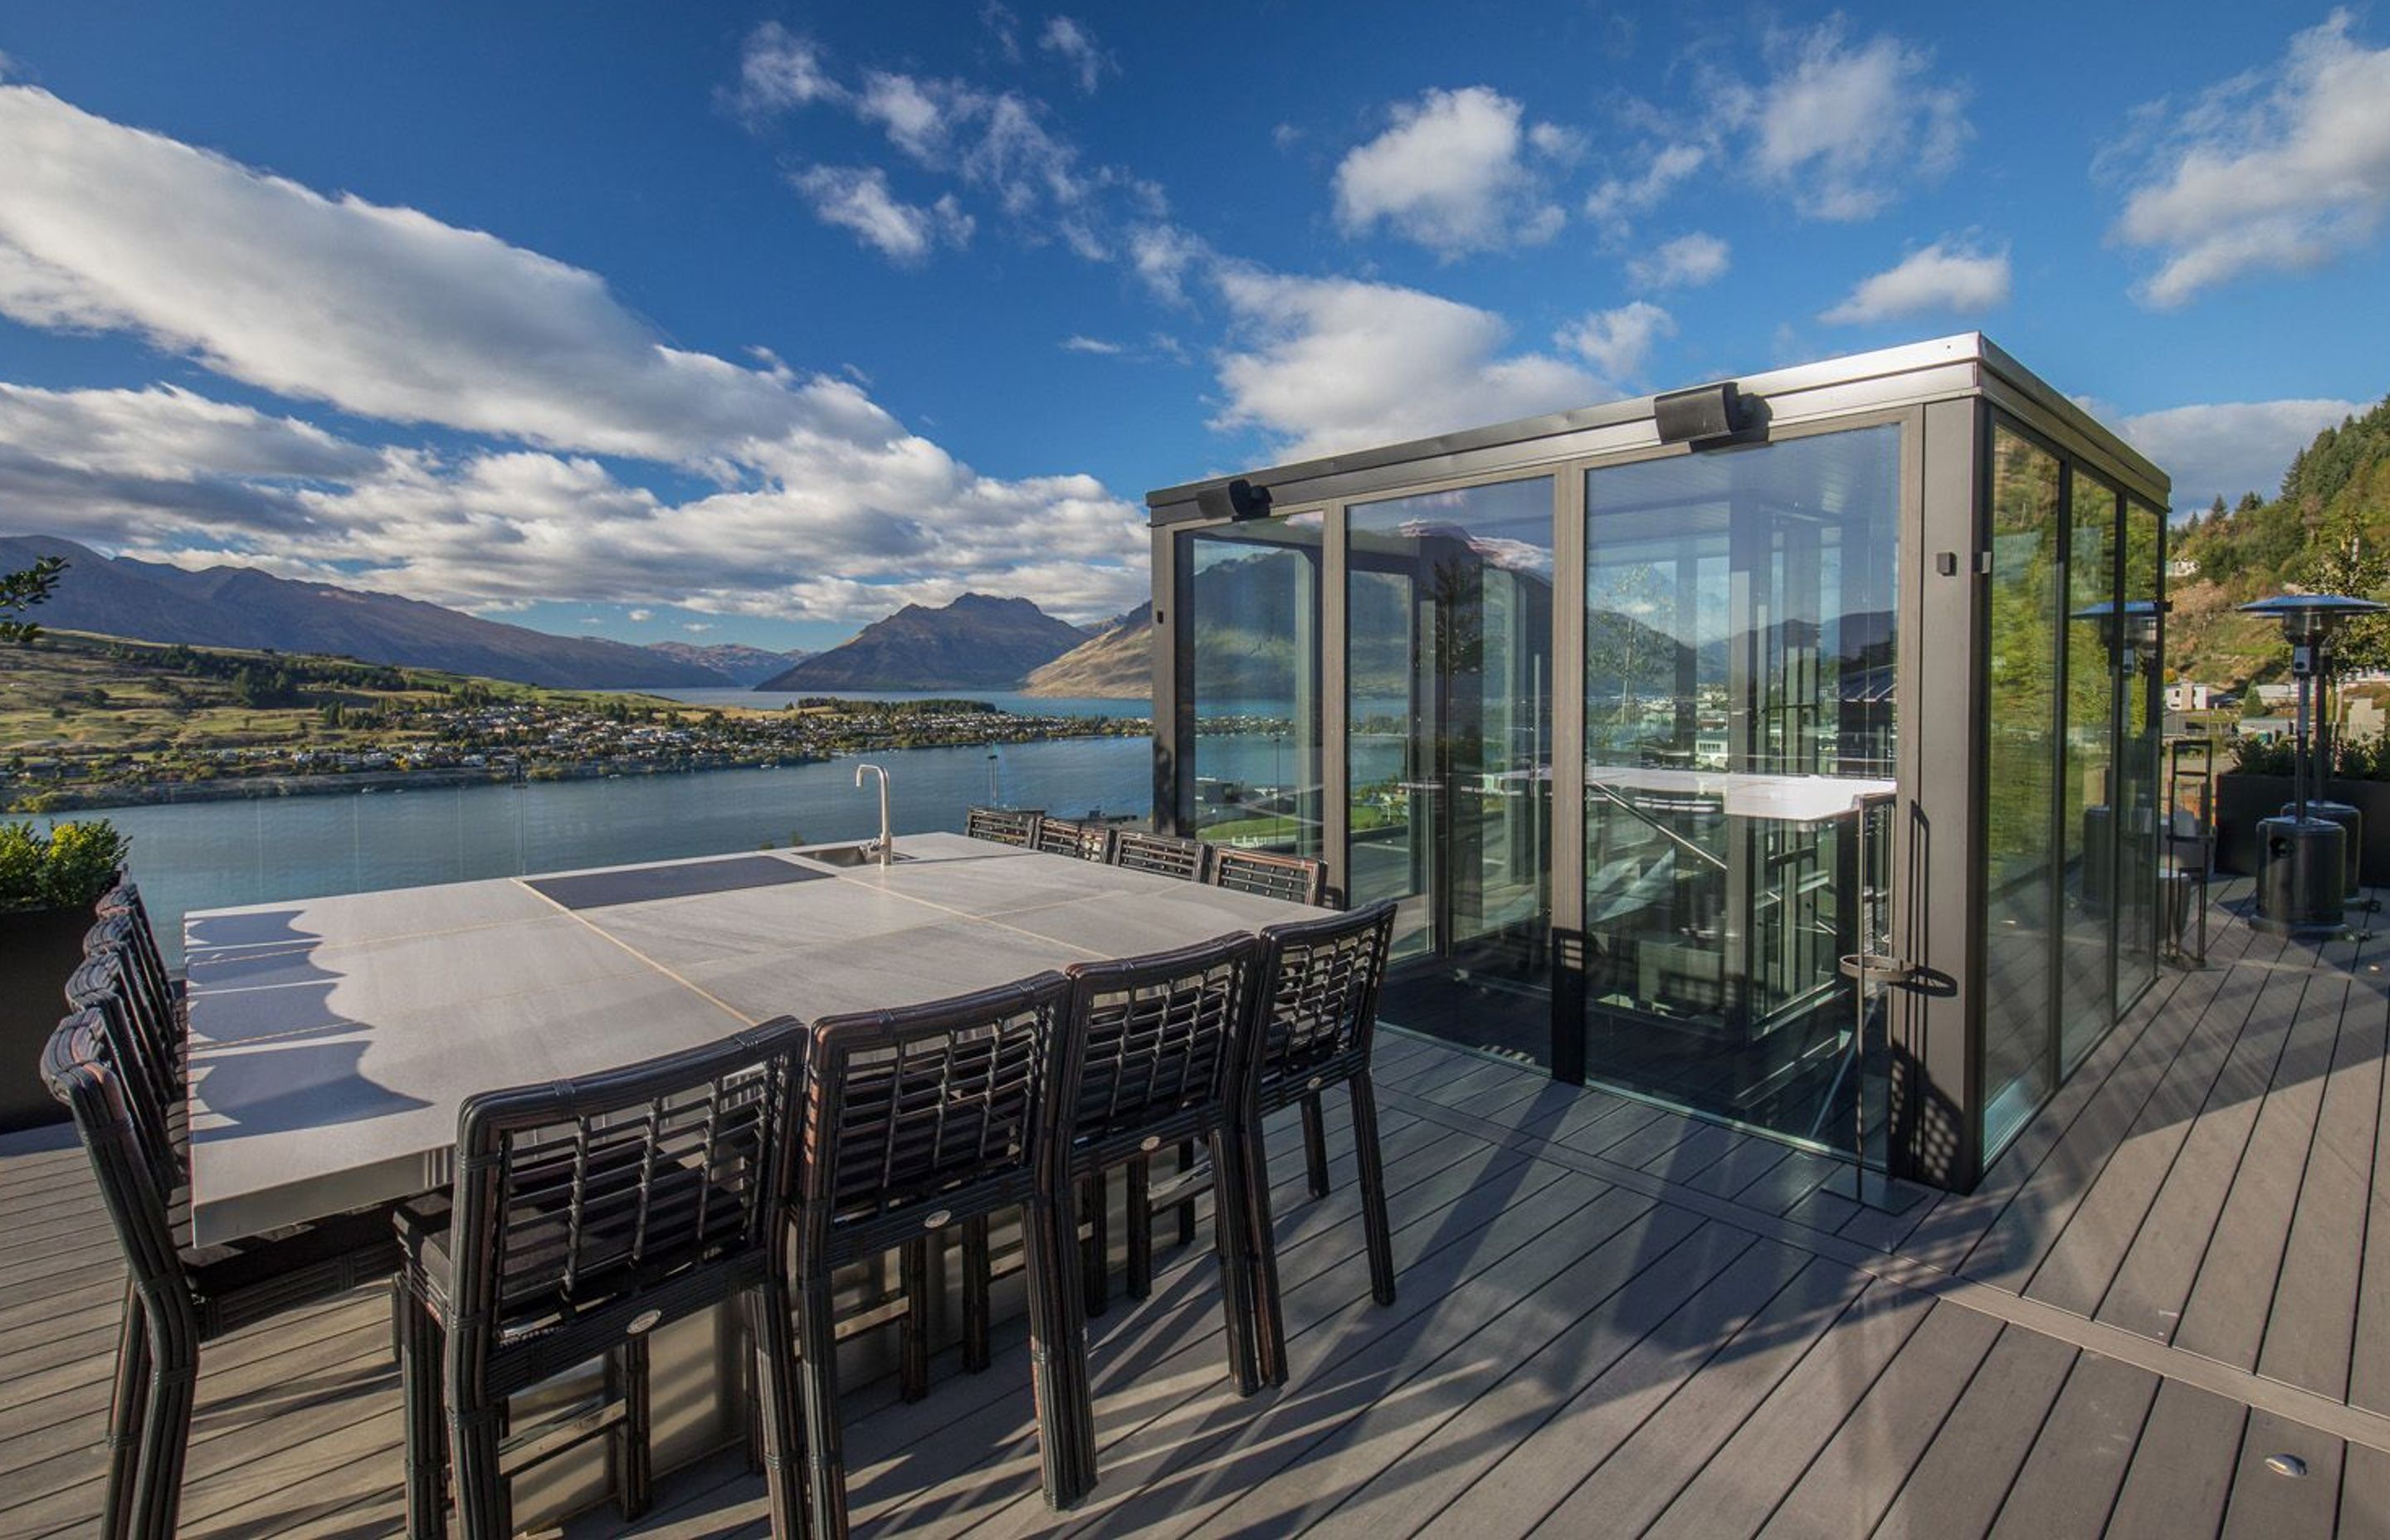 On the rooftop, a teppanyaki bar for 12 people enjoys views over the lake, accessed from the stair and lift shaft that acts like a lightwell, drawing sunlight into the core of the home.